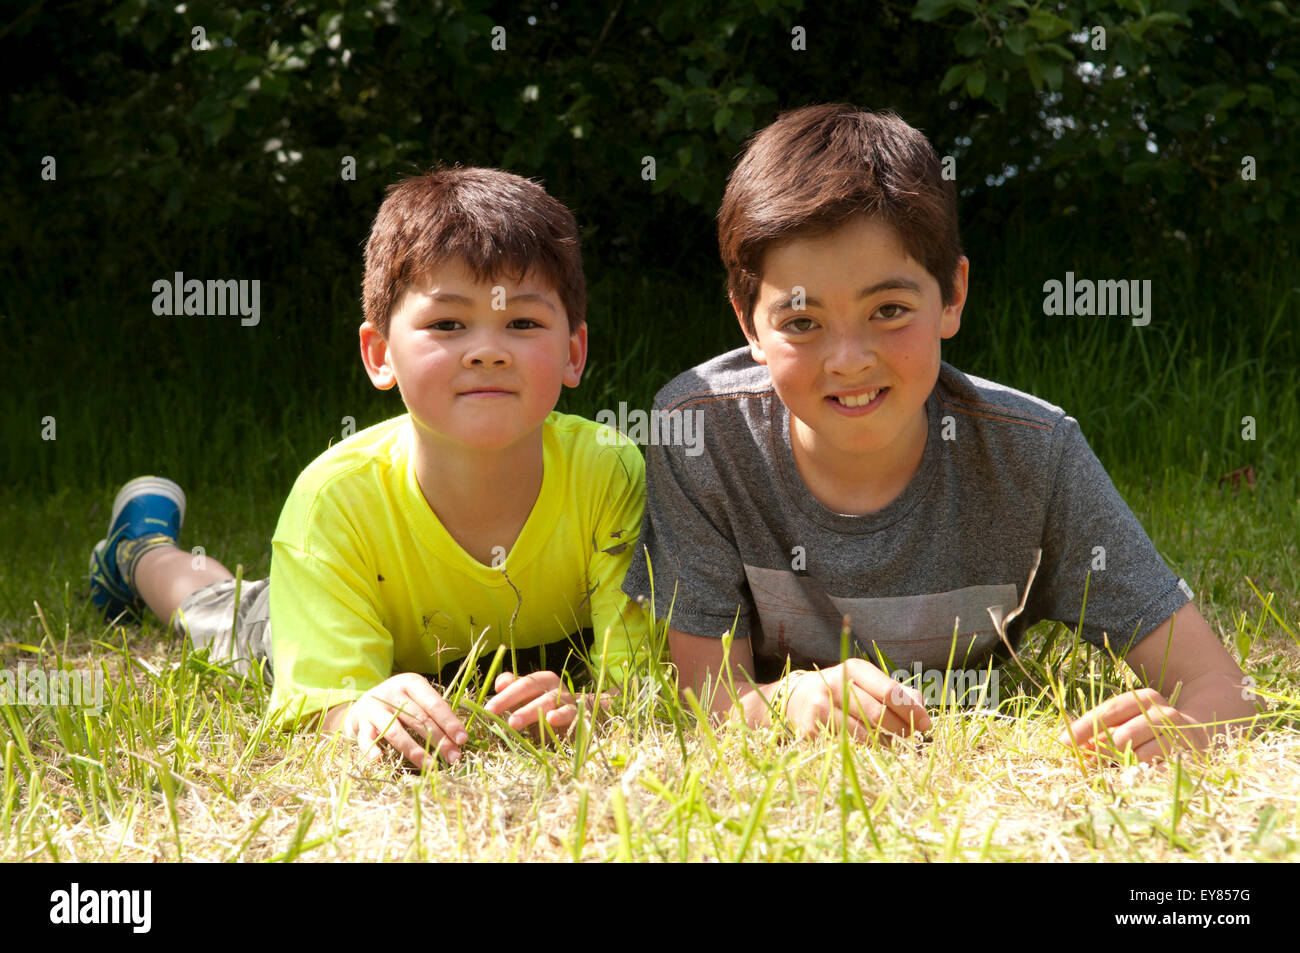 Portrait of two boys lying on the grass smiling Stock Photo